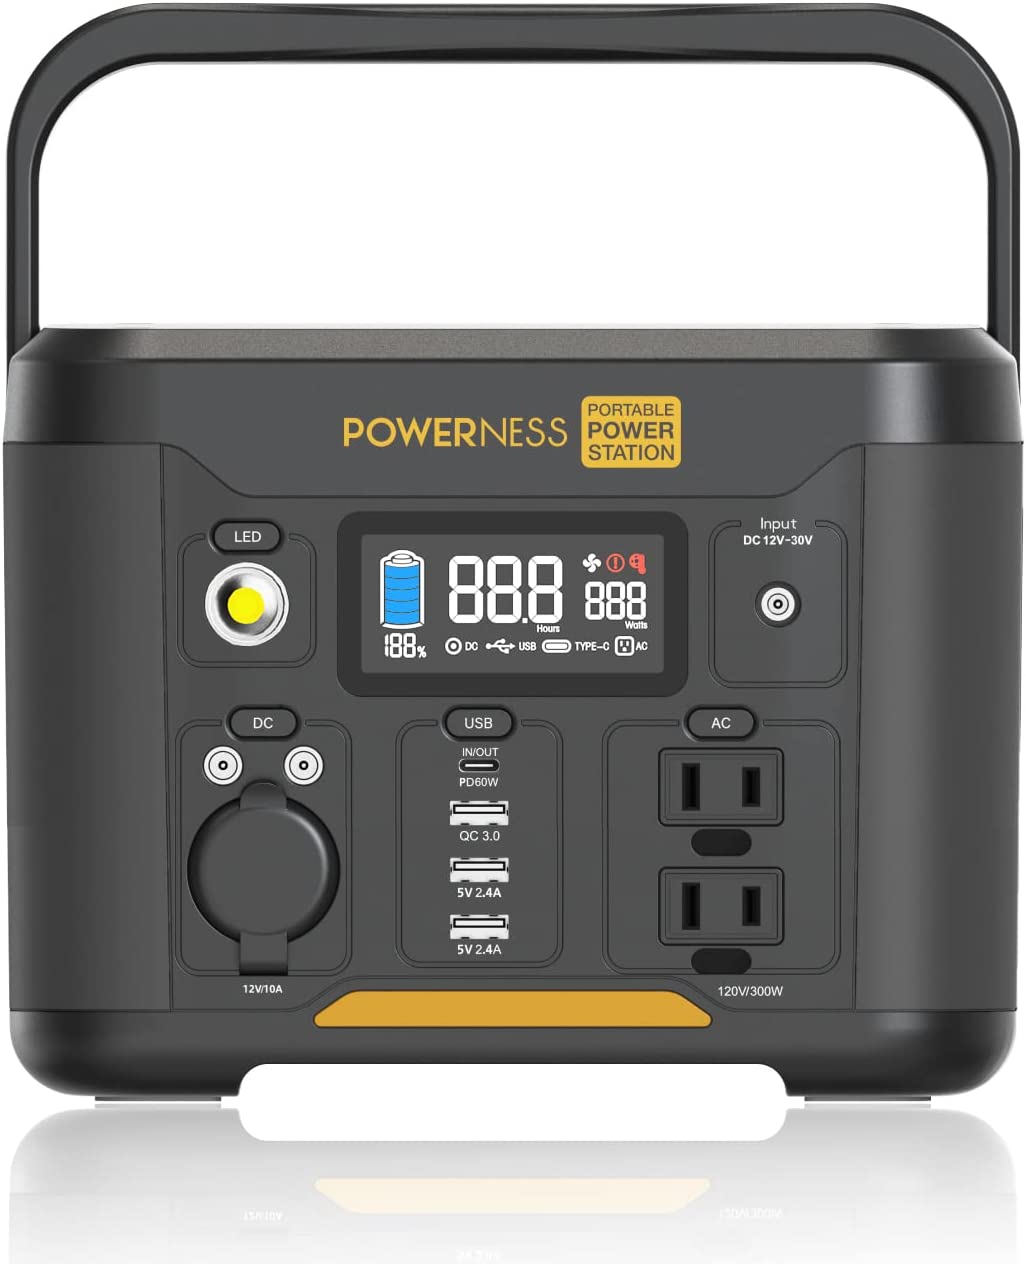 21023- Powerness Tragbare Power Station Hiker 300w Backup Lithium Batterie und kabelloser Ladeplatte, Solargenerator für Outdoor Camping/RVs/Heimgebrauch (Solarpanel optional) (Solargenerator für Outdoor Camping )